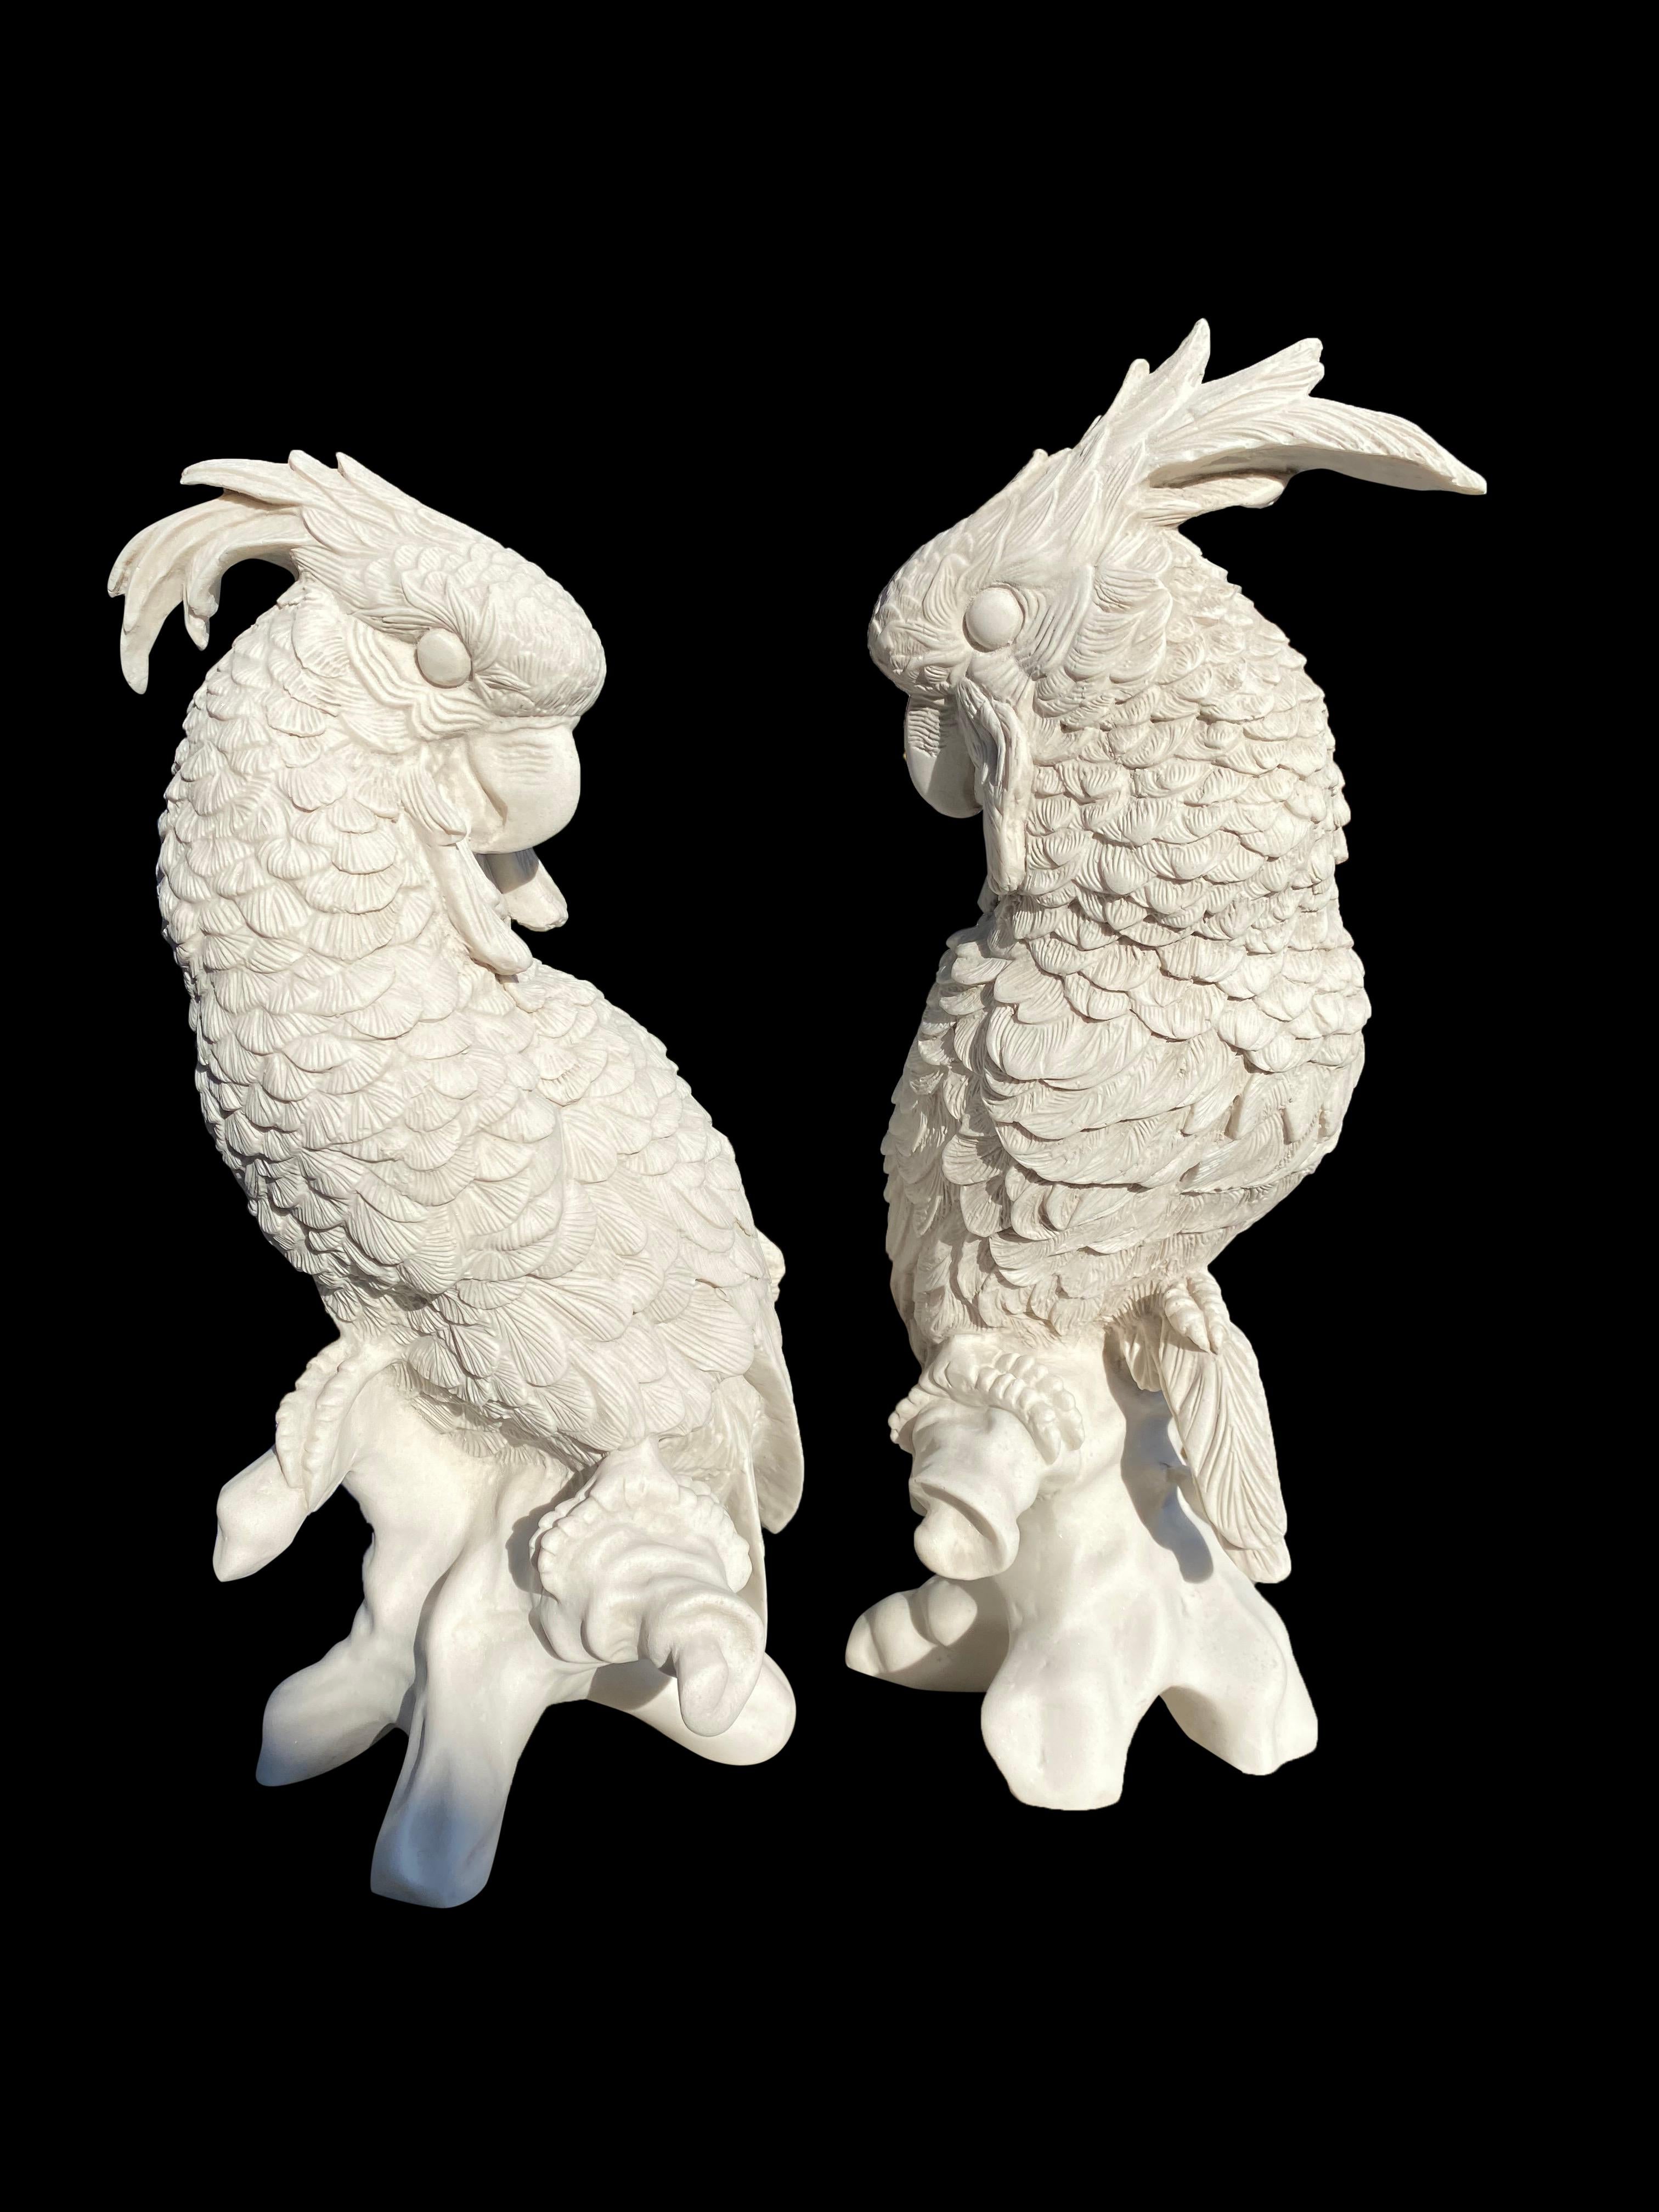 A gorgeous pair of Meissen parrots sculptures, 20th century.

Meissen Porcelain or Meissen China was the first European hard-paste porcelain. Early experiments were done in 1708 by Ehrenfried Walther von Tschirnhaus. After his death that October,